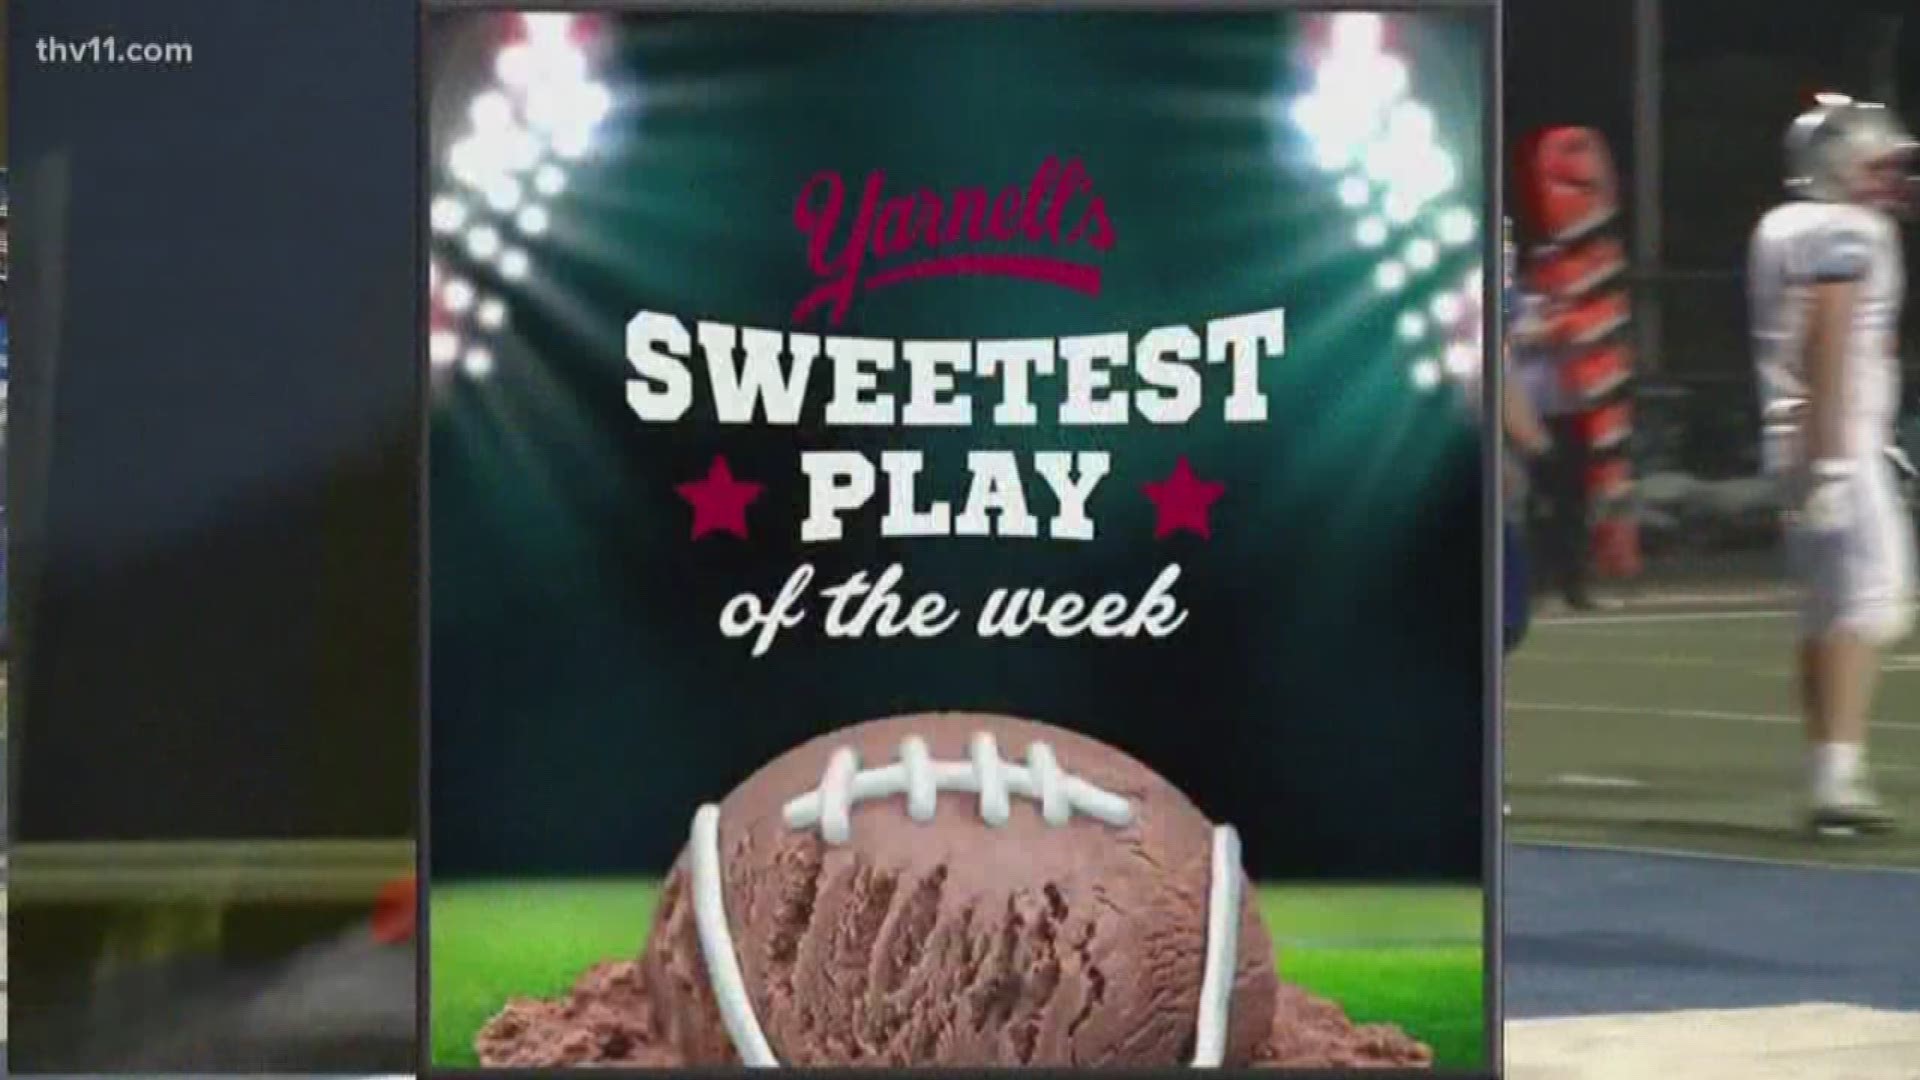 Vote for Yarnell's Sweetest Play of week eight! Poll closes on Tuesday at 5 p.m.